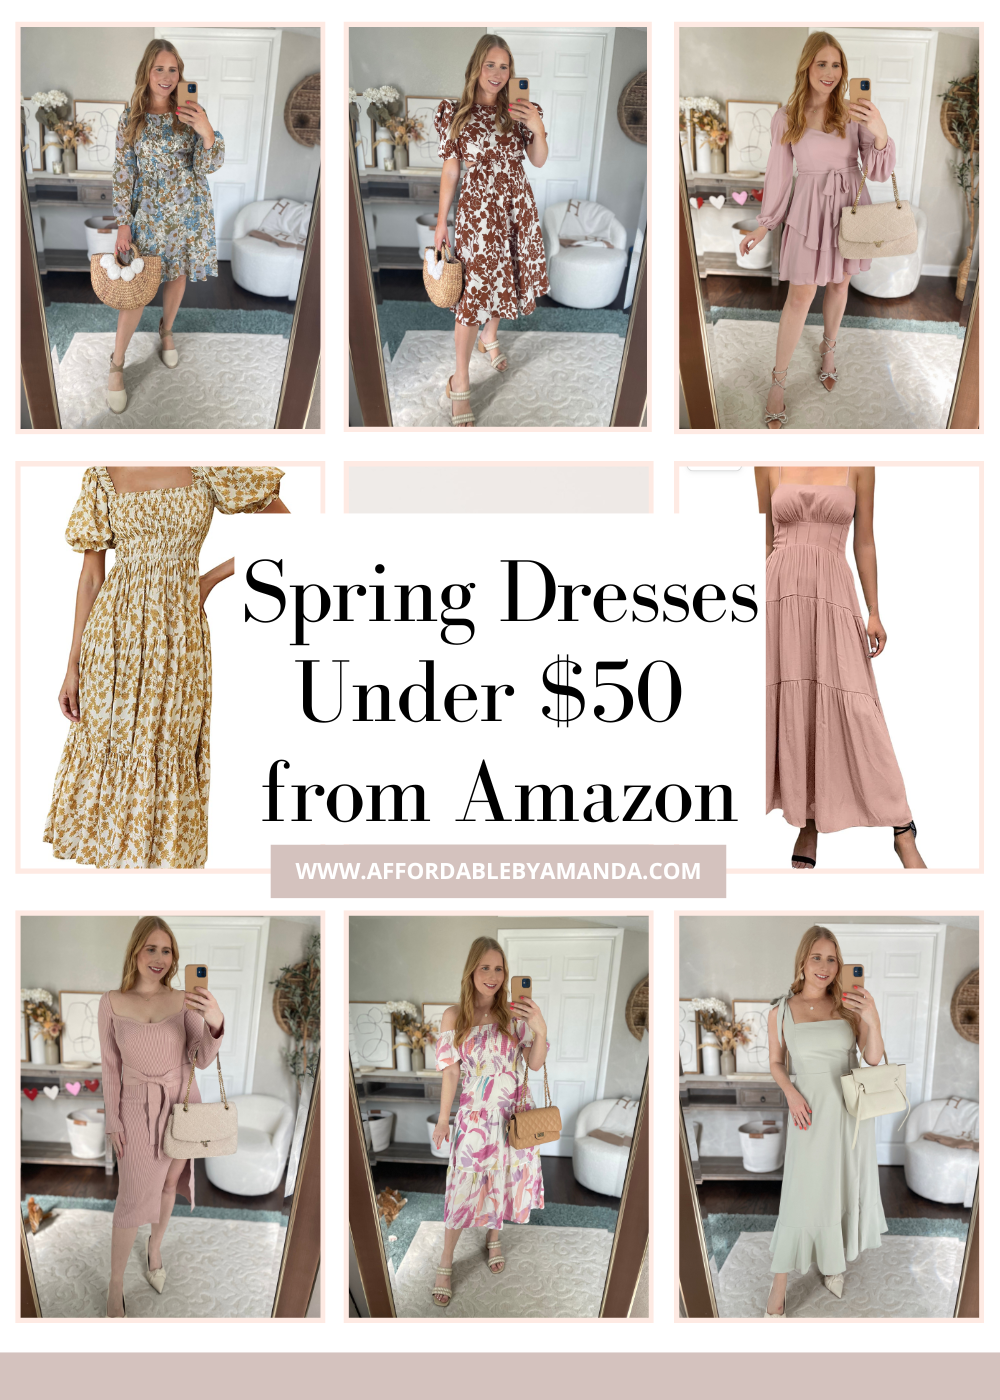 Spring Fashion on Amazon 2023 - Best Selling Spring Dresses From Amazon - Spring Dresses from Amazon for 2023 - Affordable by Amanda